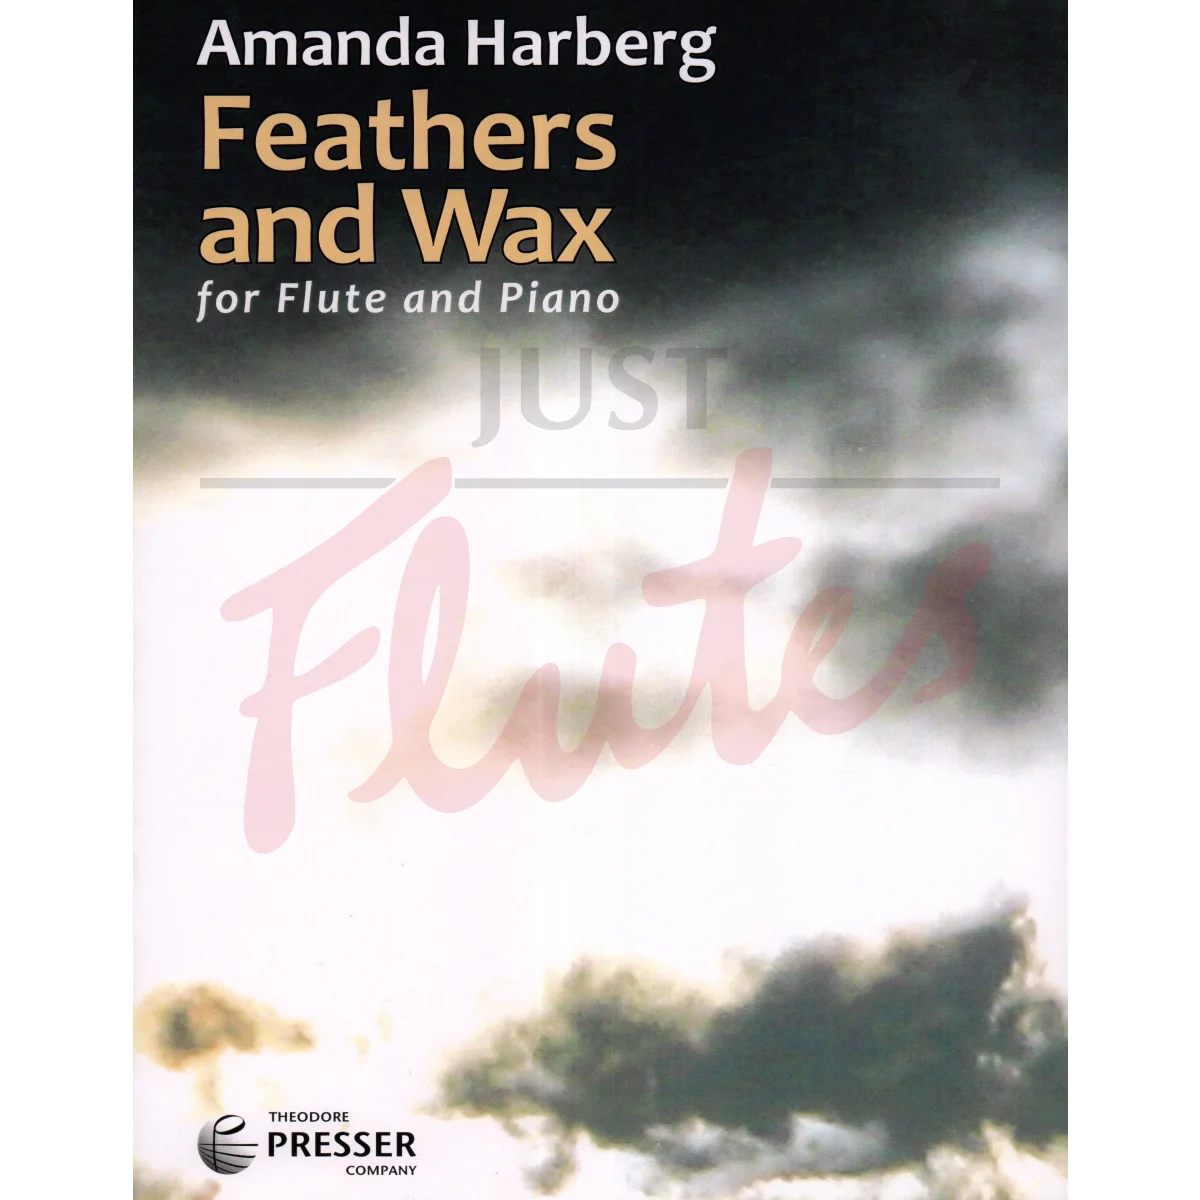 Feathers and Wax for Flute and Piano